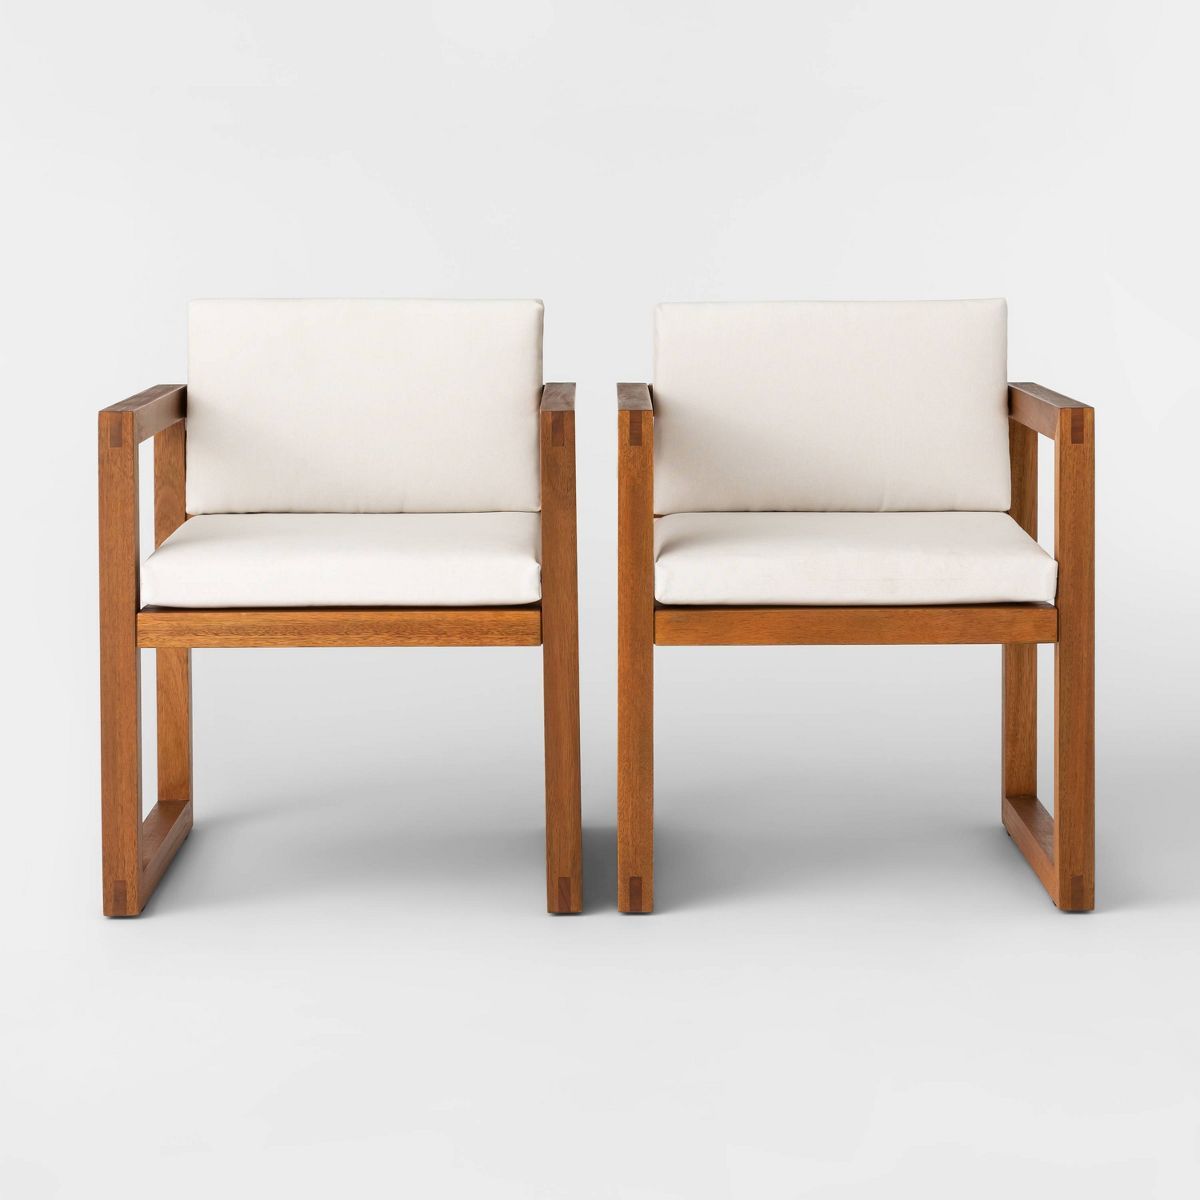 Kaufmann 2pk Wood Patio Arm Chairs - Natural - Project 62™ | Target